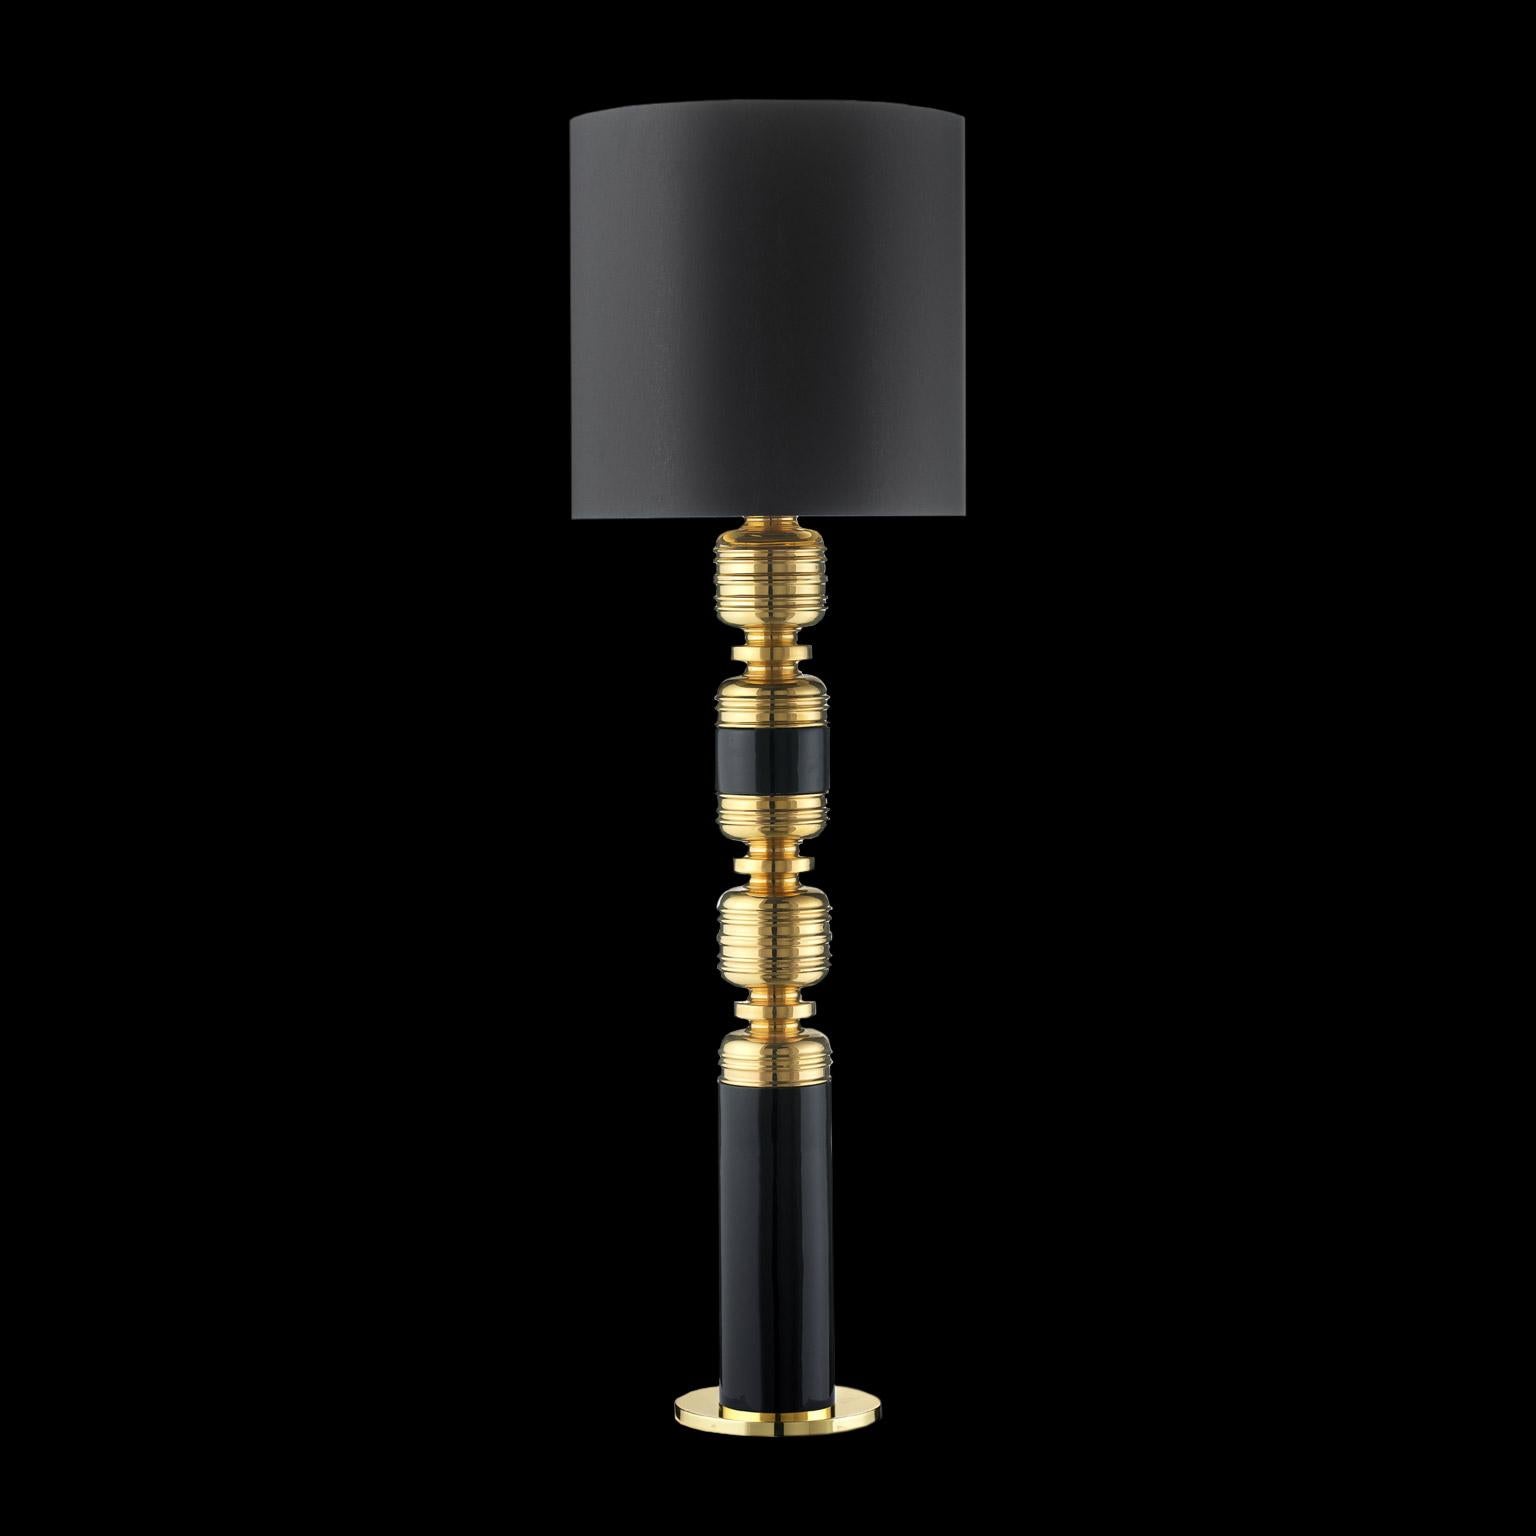 Ceramic lamp THEA 5 handcrafted in 24-karat gold 
with black enamel with cotton lampshade

cod. LT005
measures: H. 155.0 cm. Dm. 40.0 cm.